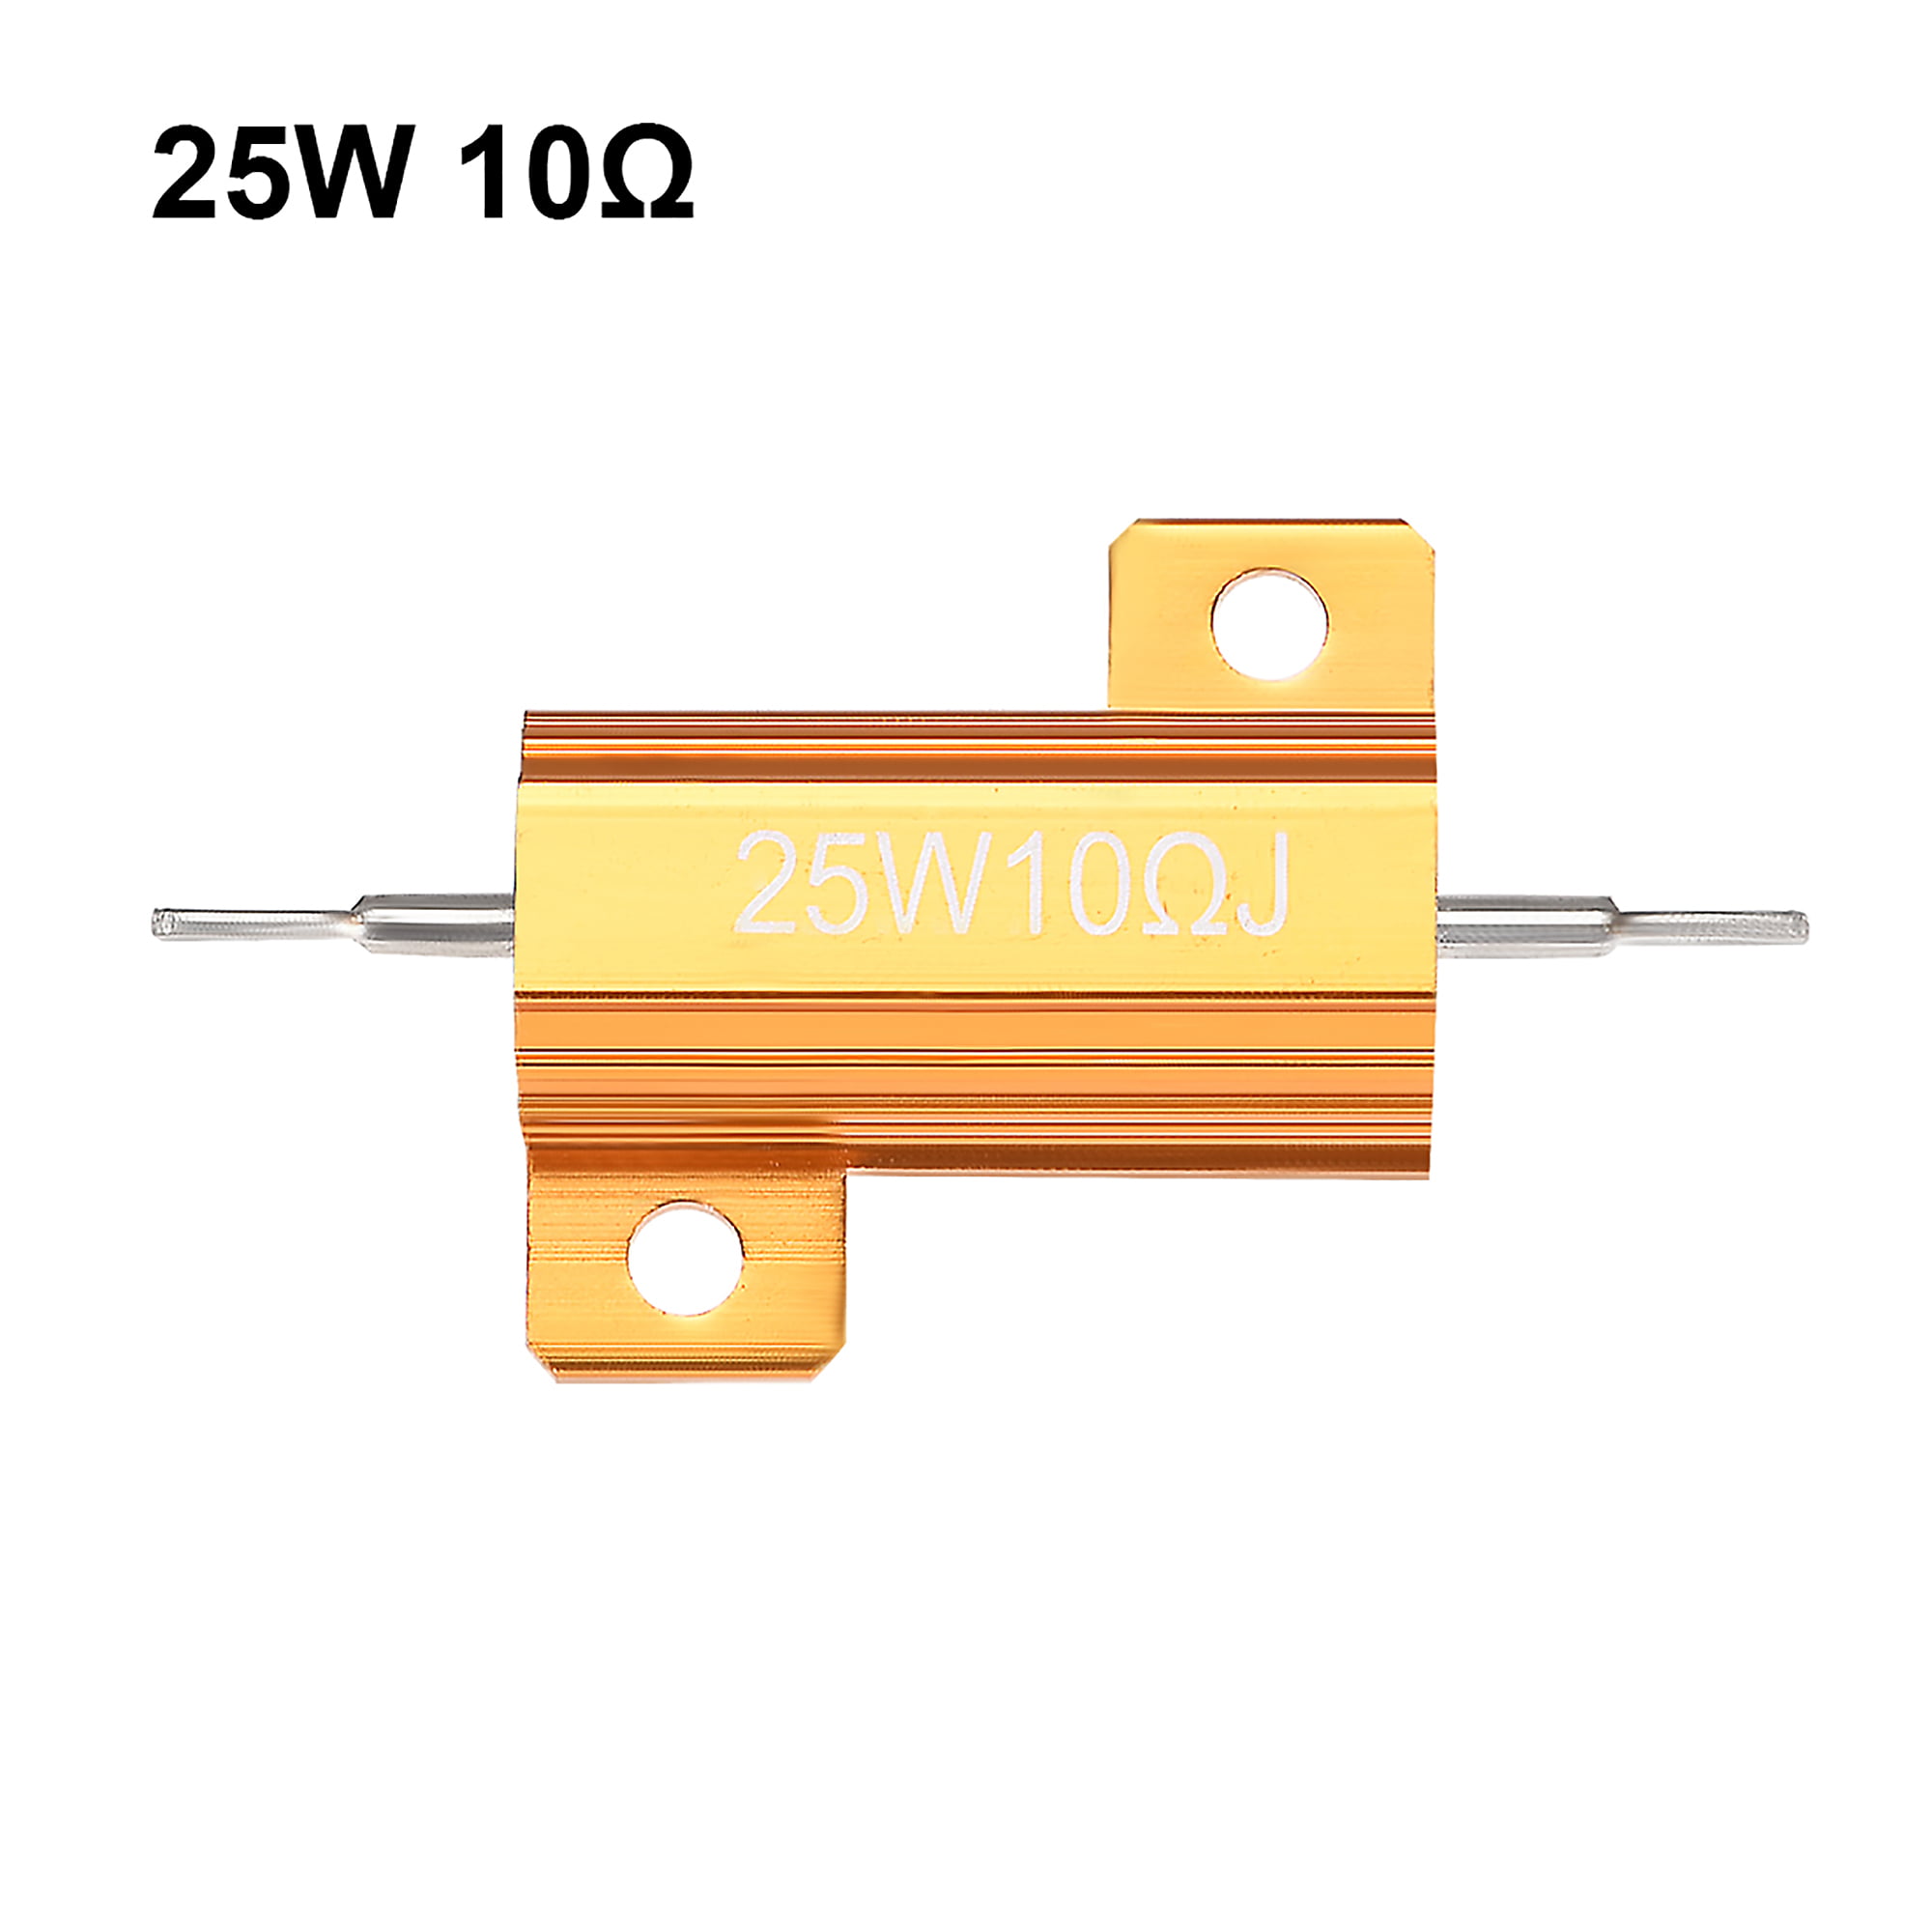 uxcell 50W 6 Ohm 5% Aluminum Housing Resistor Screw Tap Chassis Mounted Aluminum Case Wirewound Resistor Load Resistors Gold Tone 5pcs a18041900ux0170